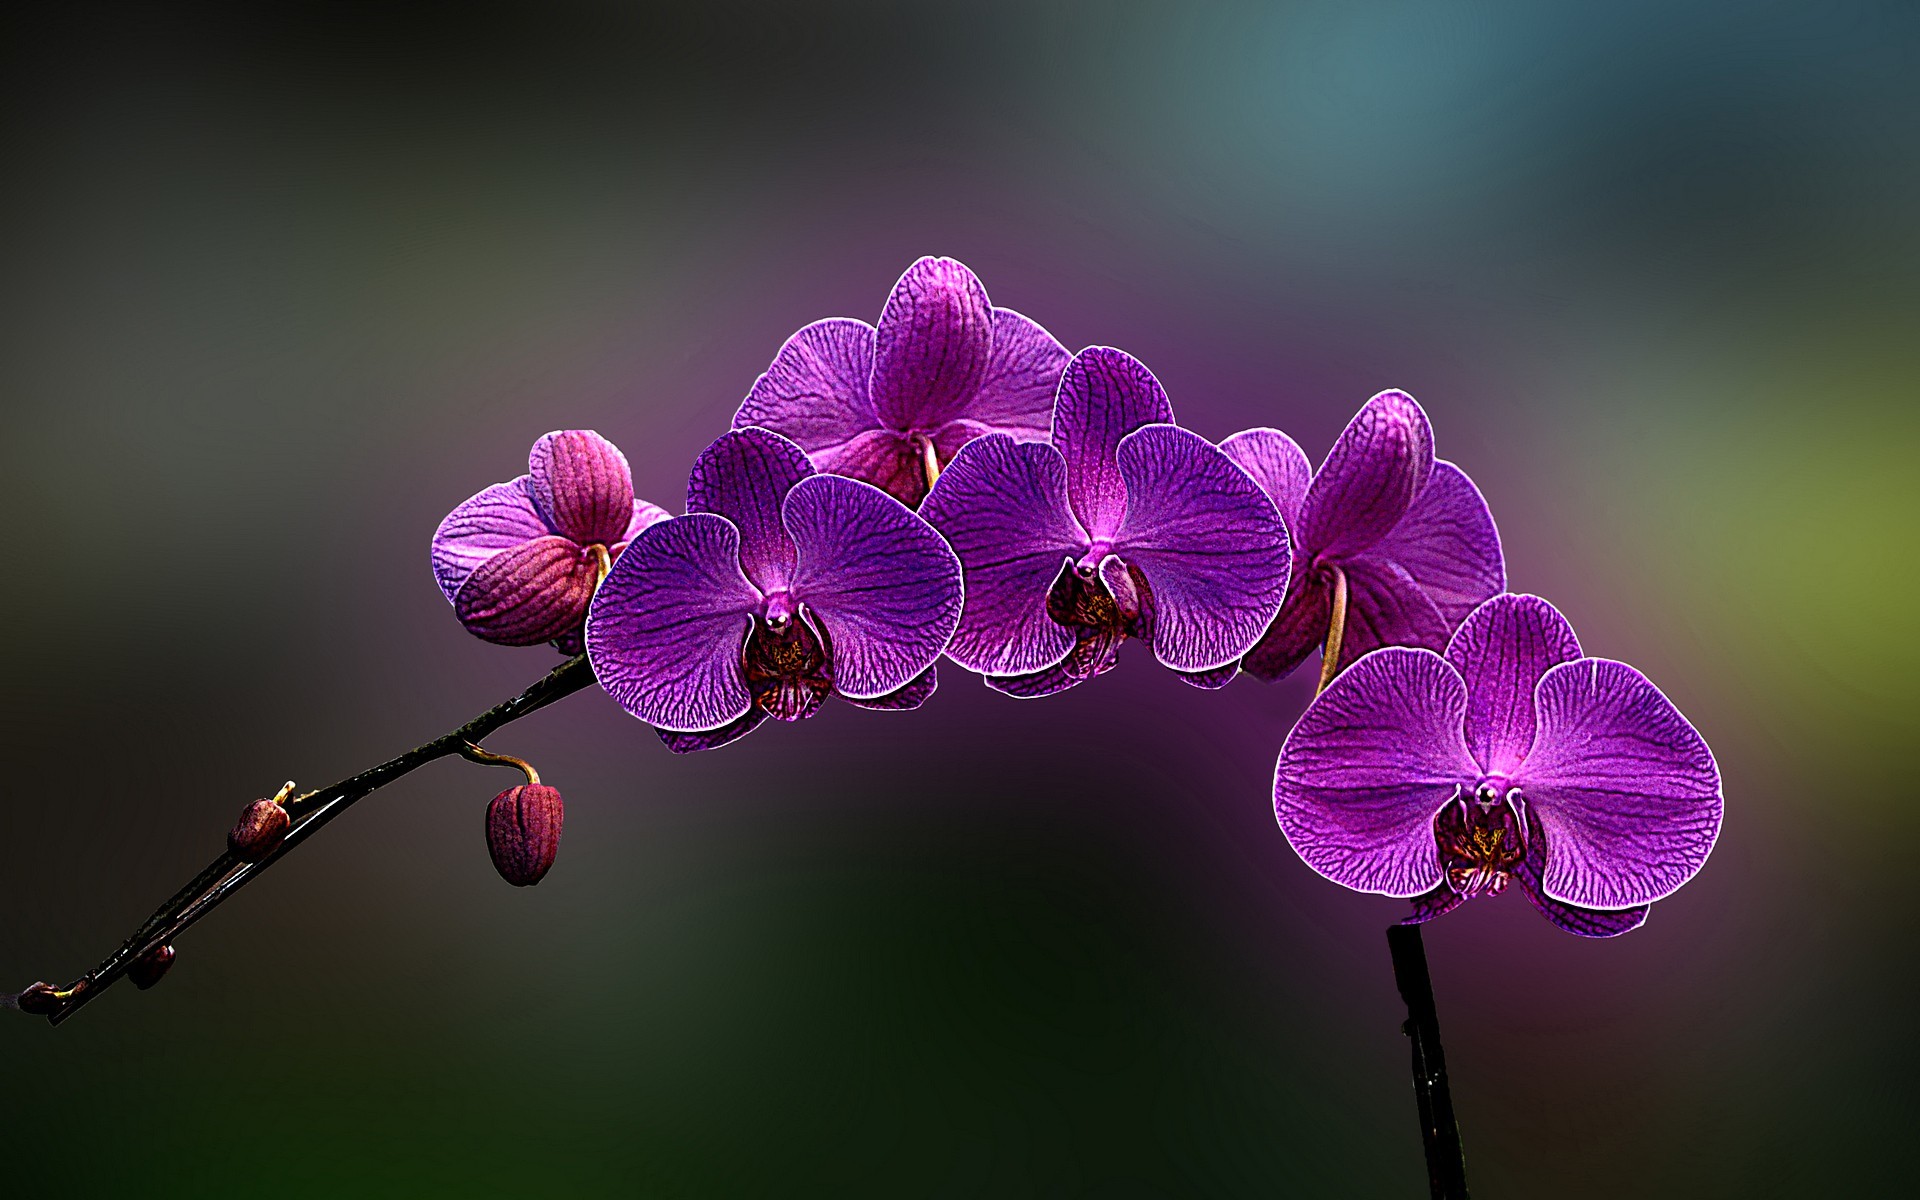 1920x1200 Red orchid wallpaper Flower wallpapers | HD Wallpapers | Pinterest | Orchid  wallpaper and Wallpaper